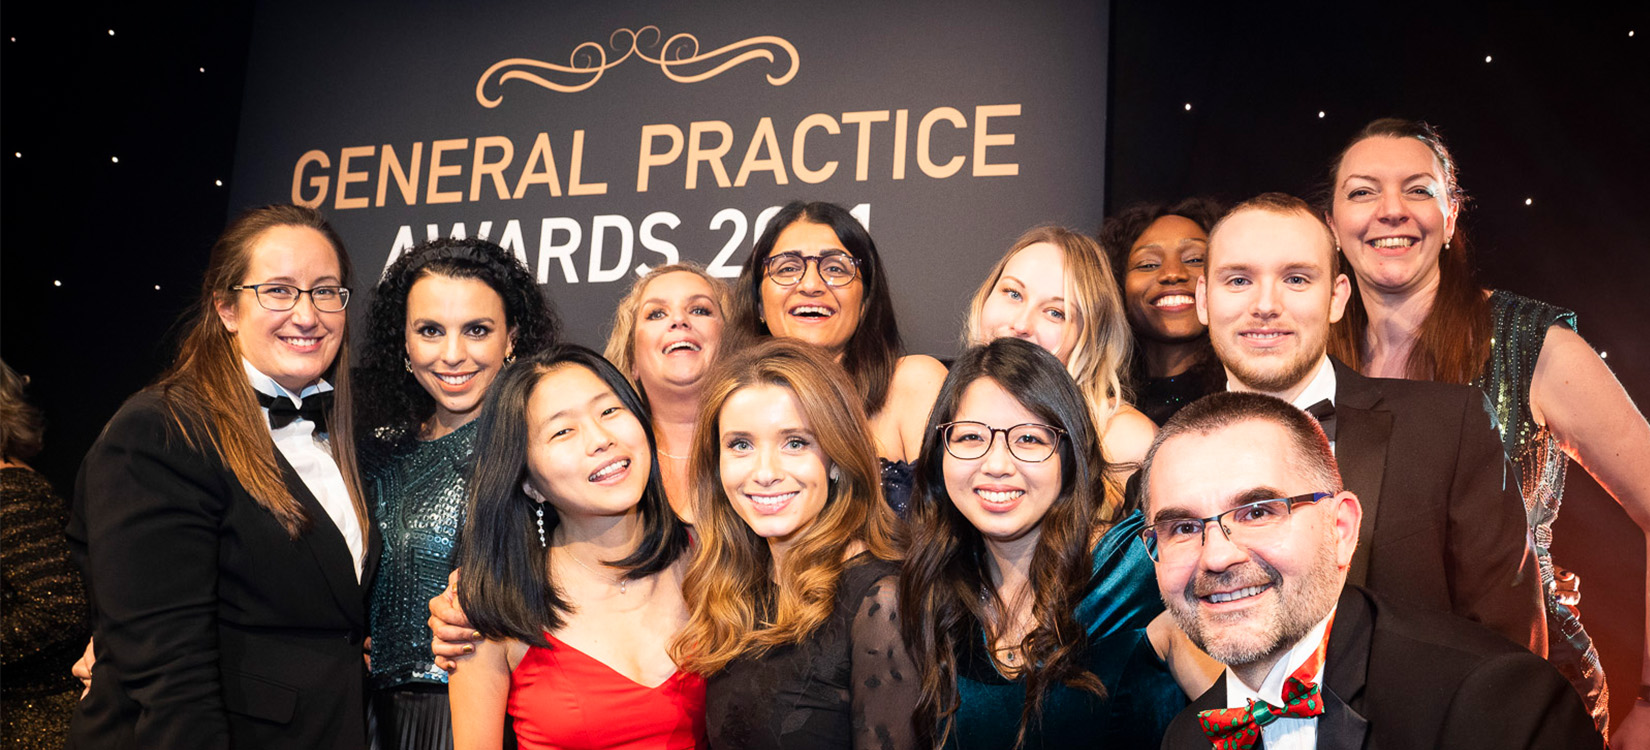 General Practice Awards 2022 Shortlist is announced